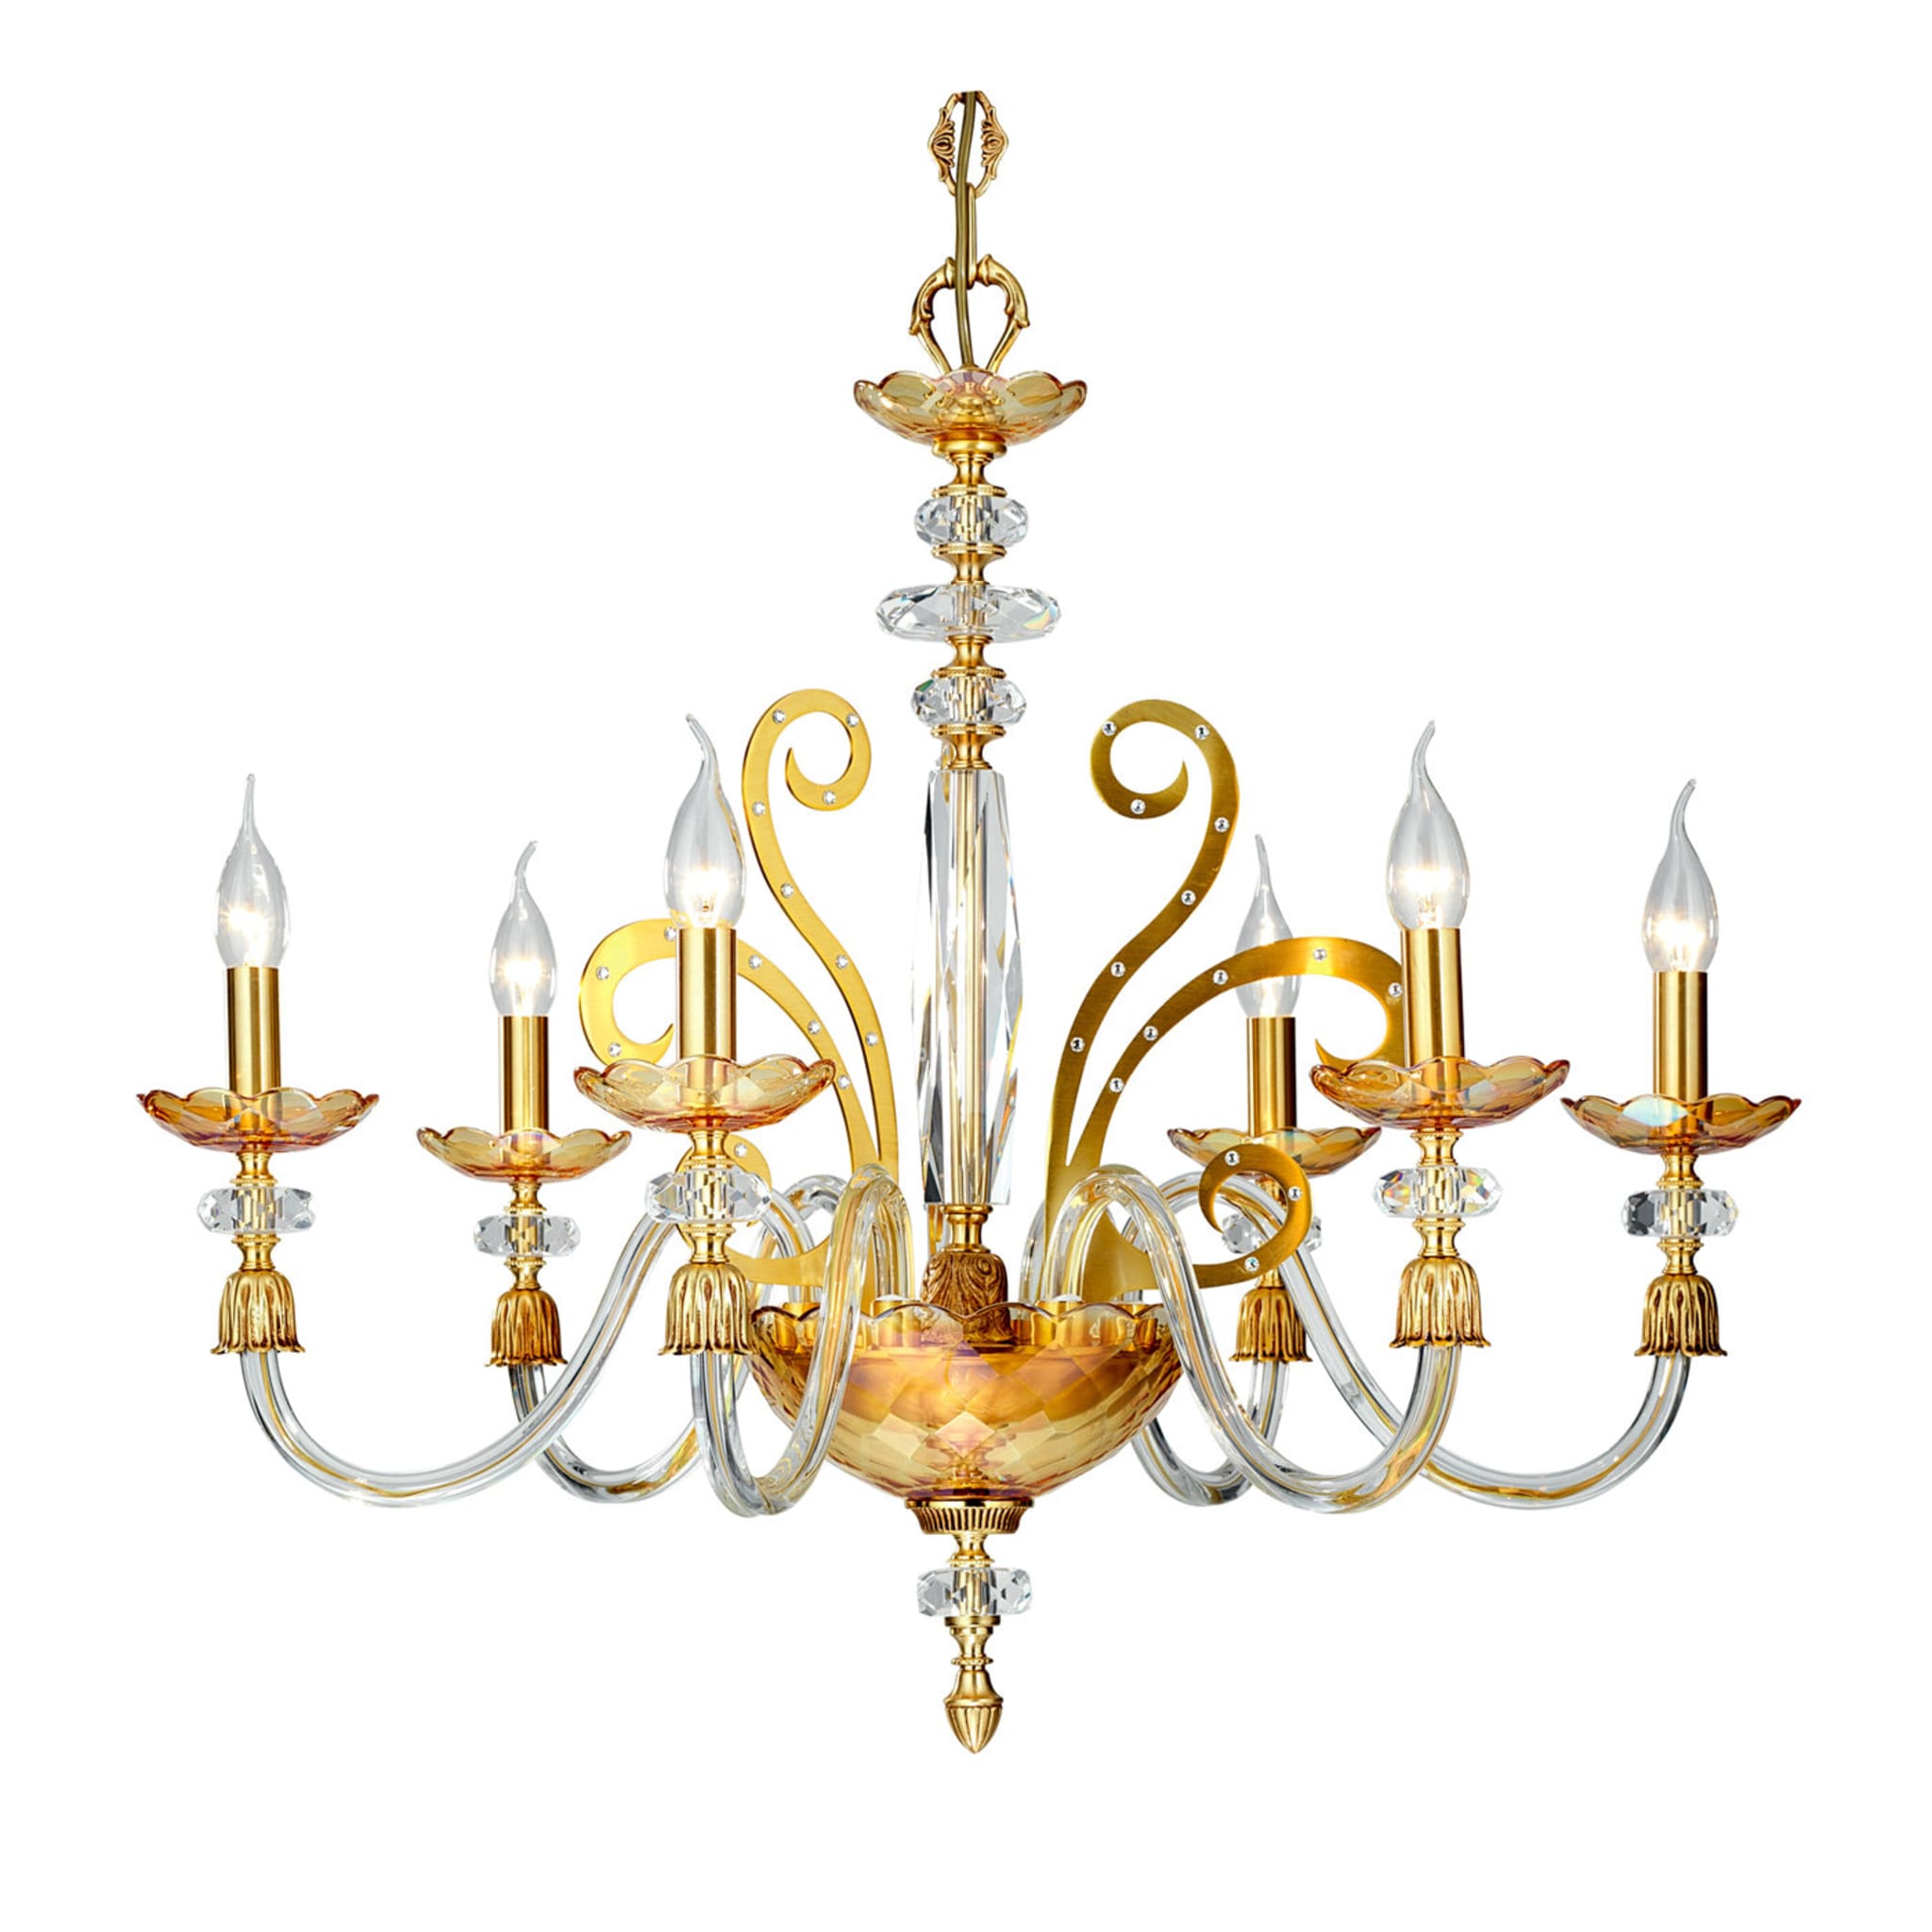 6 light chandelier in glass and gold - Main view